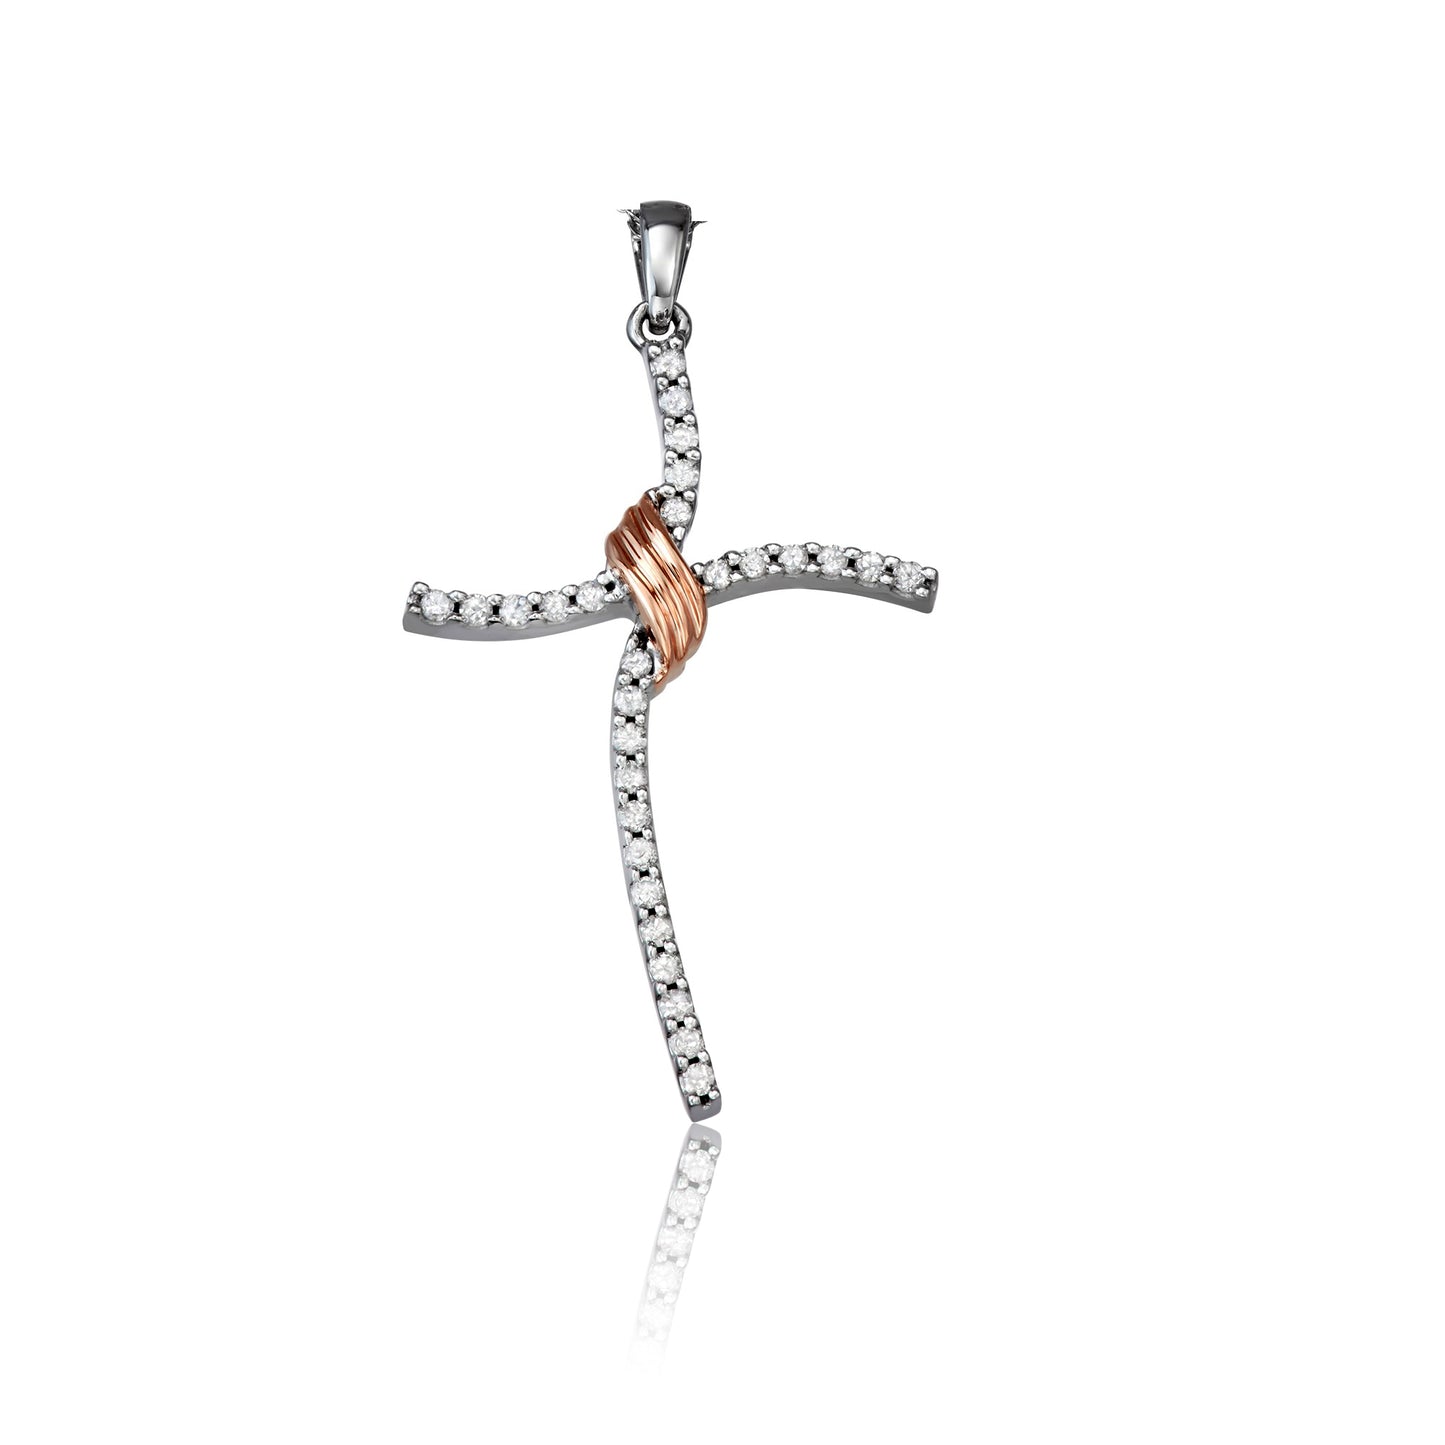 10k White and  Rose Gold 0.22 ct TDW White Diamond Cross Necklace